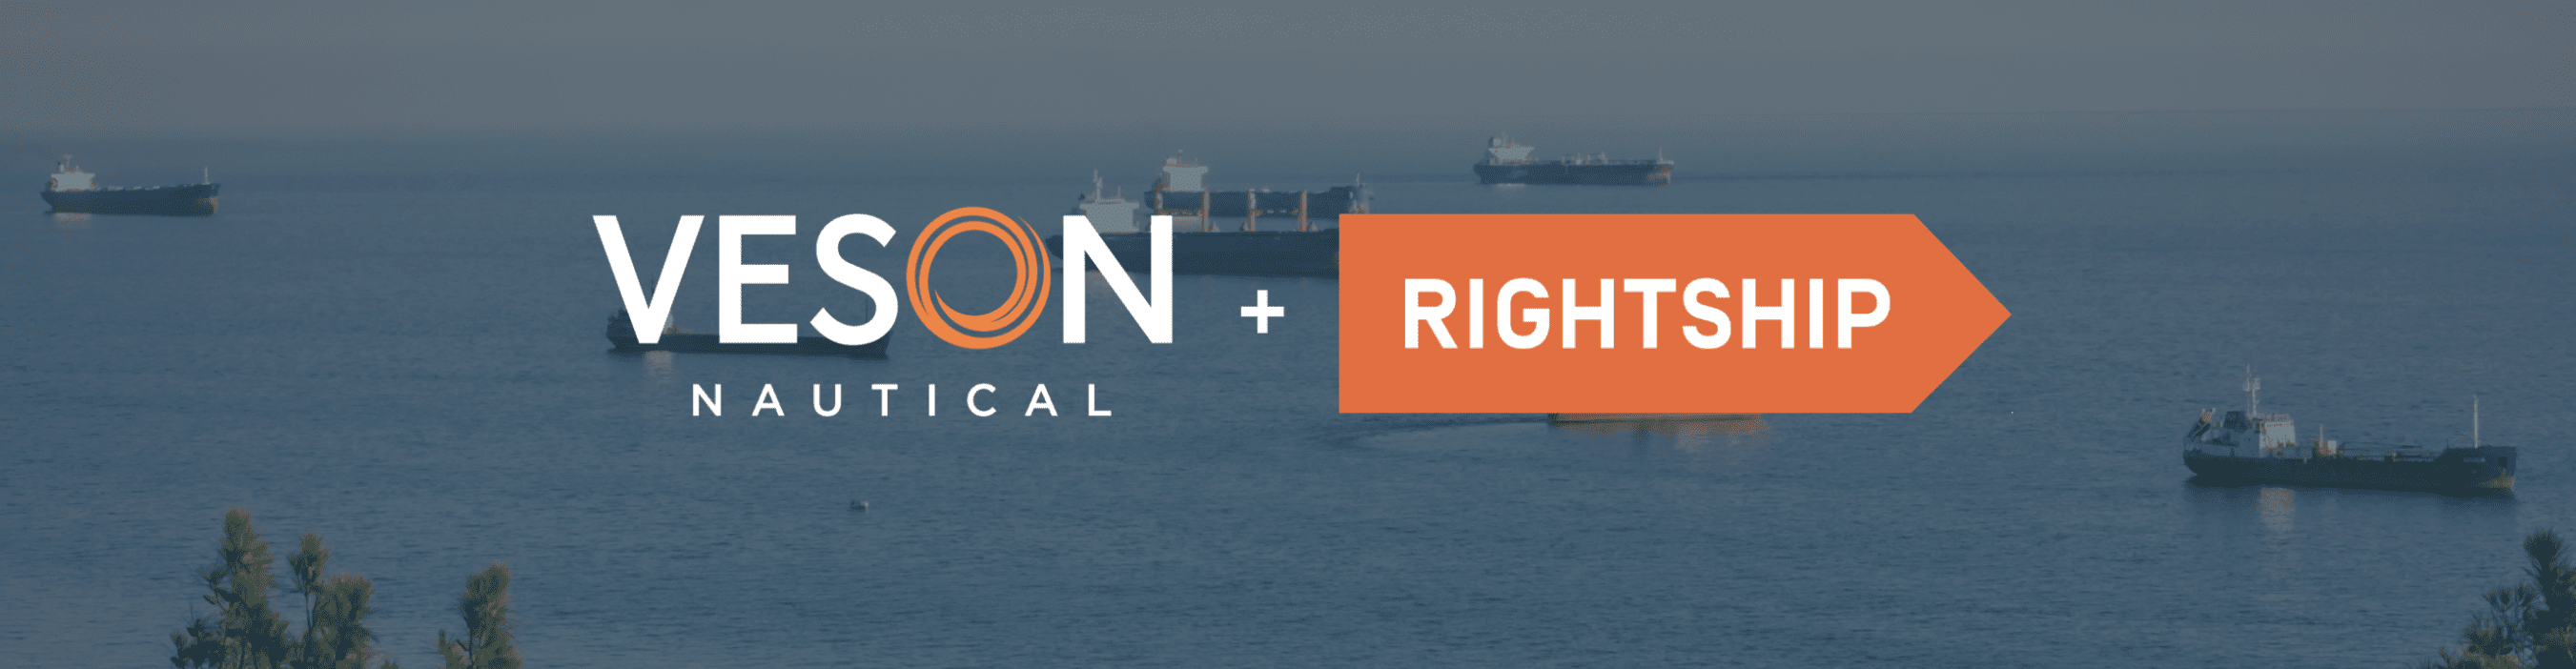 A Clear view Ahead As RightShip And Veson Nautical Collaboration Enables Sustainable Choices For Charterers And Managers